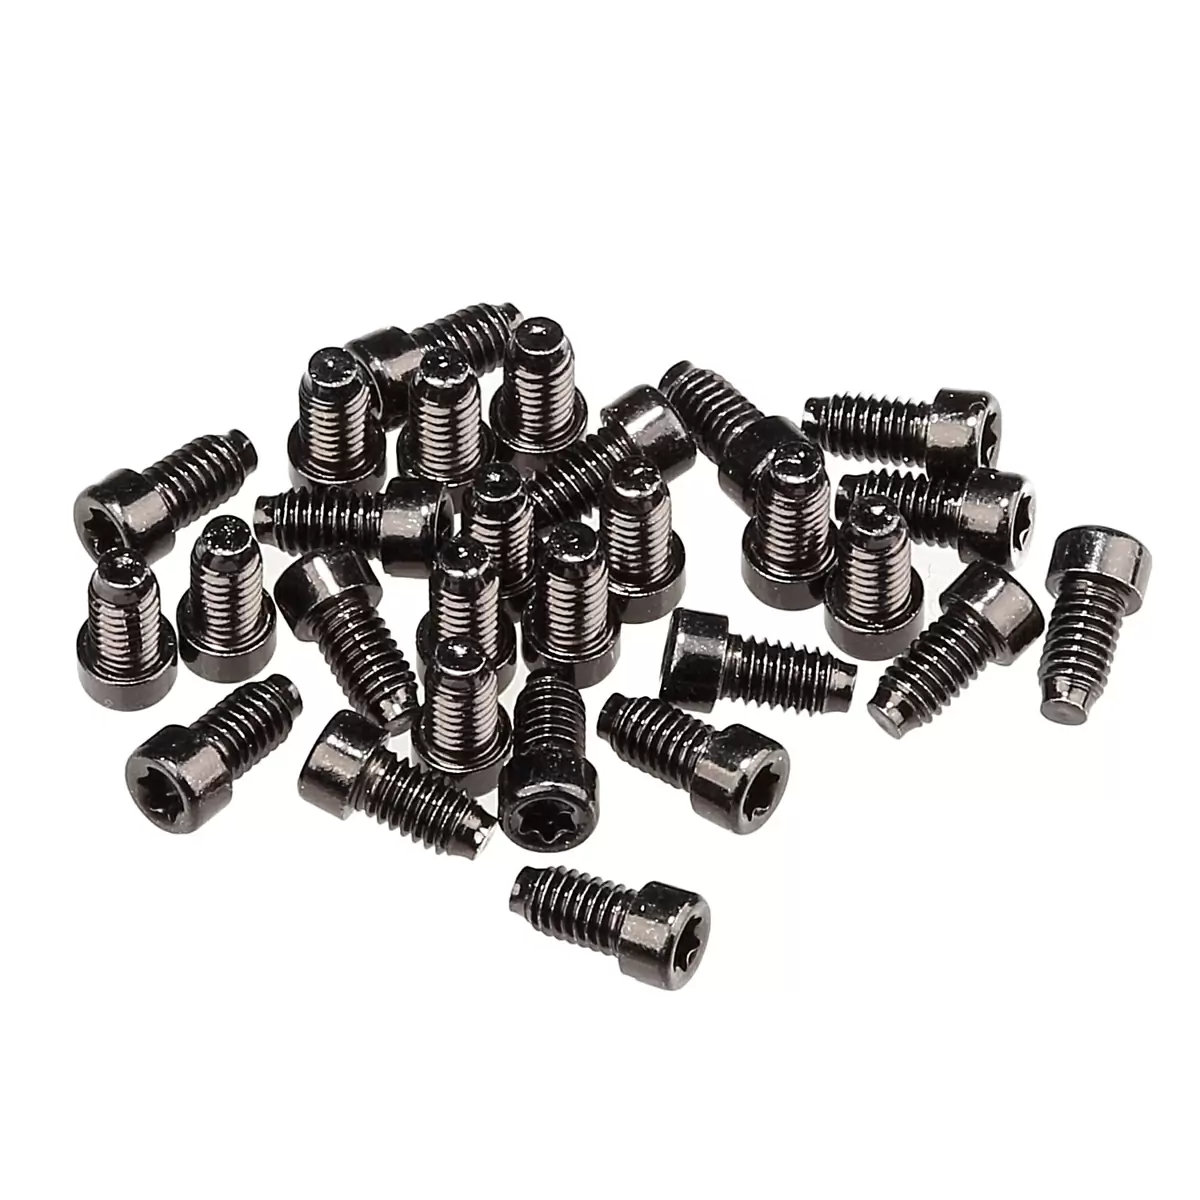 Spare short pin kit (7mm) for Spoon, Spike, Oozy pedals - image